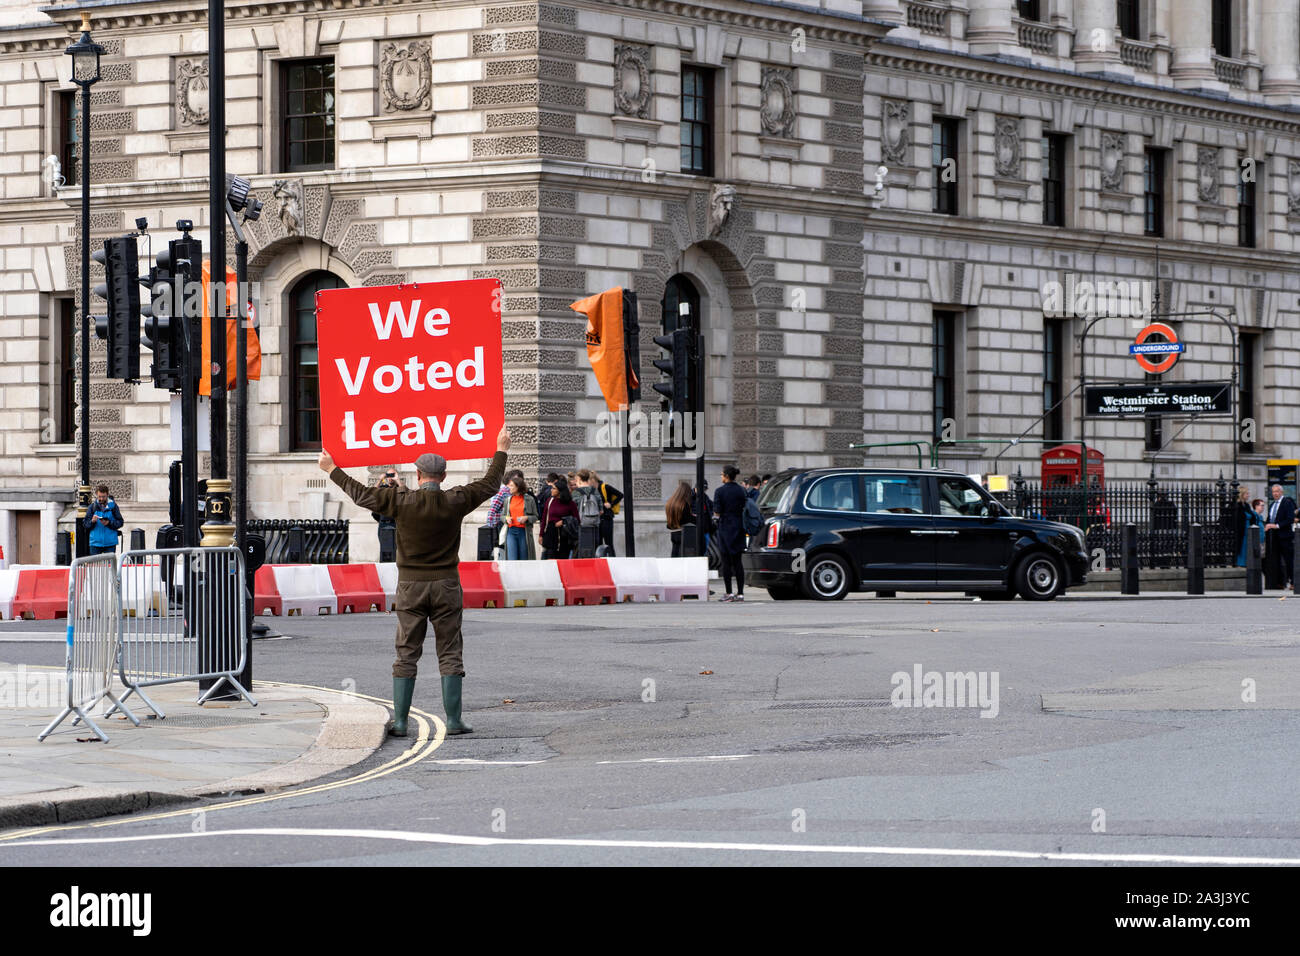 LONDON, UNITED KINGDOM - OCTOBER 1, 2019. Old Man is Holding the Red Banner on the Parliament Square Supporting Brexit - We Voted Leave. Stock Photo